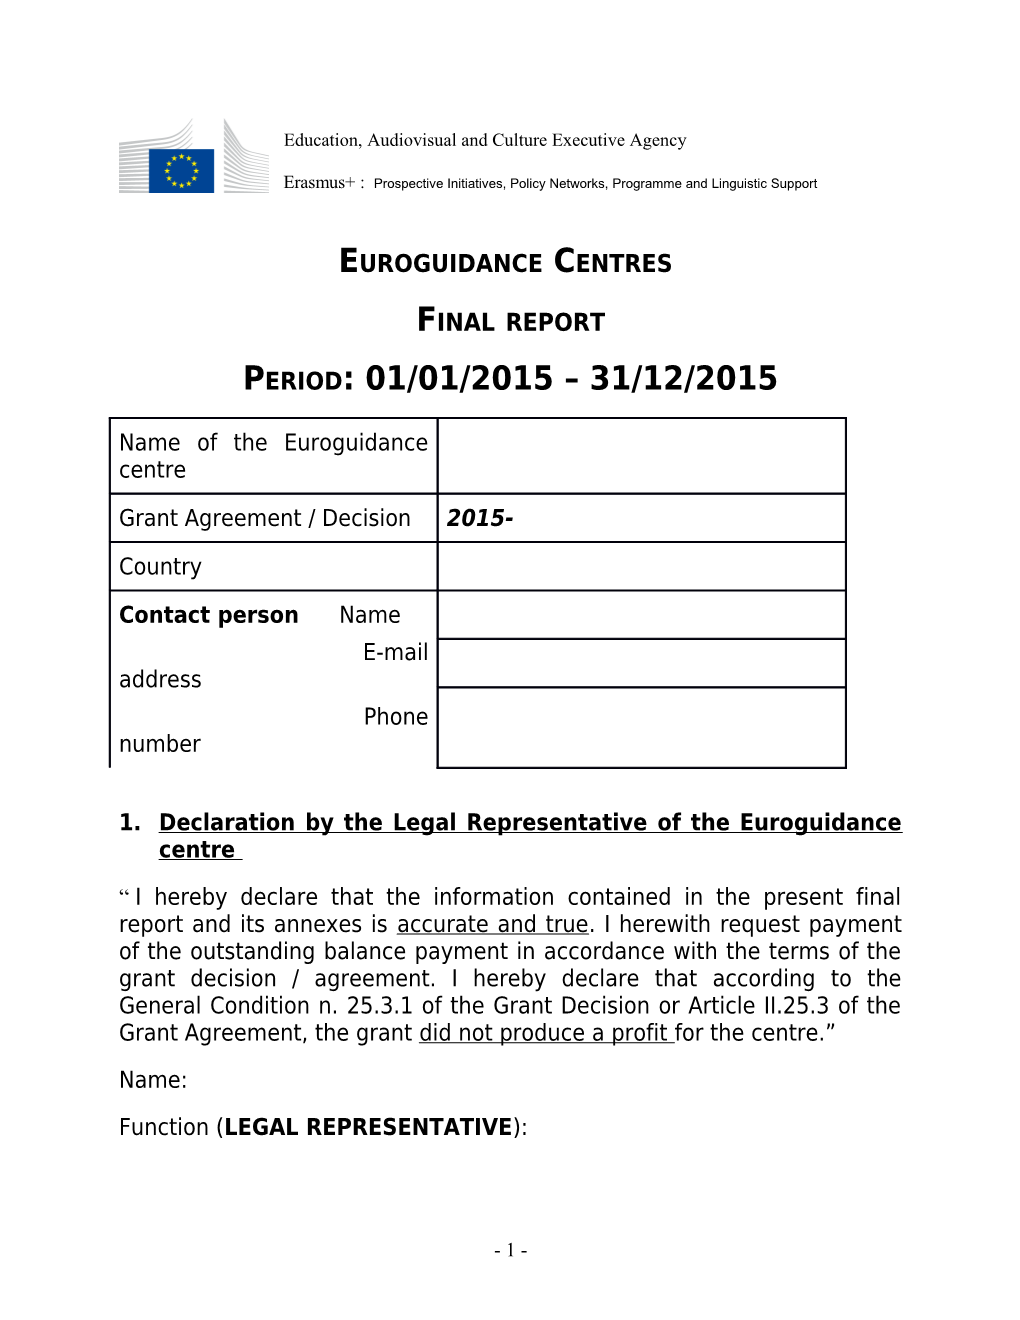 1. Declaration by the Legal Representative of the Euroguidance Centre